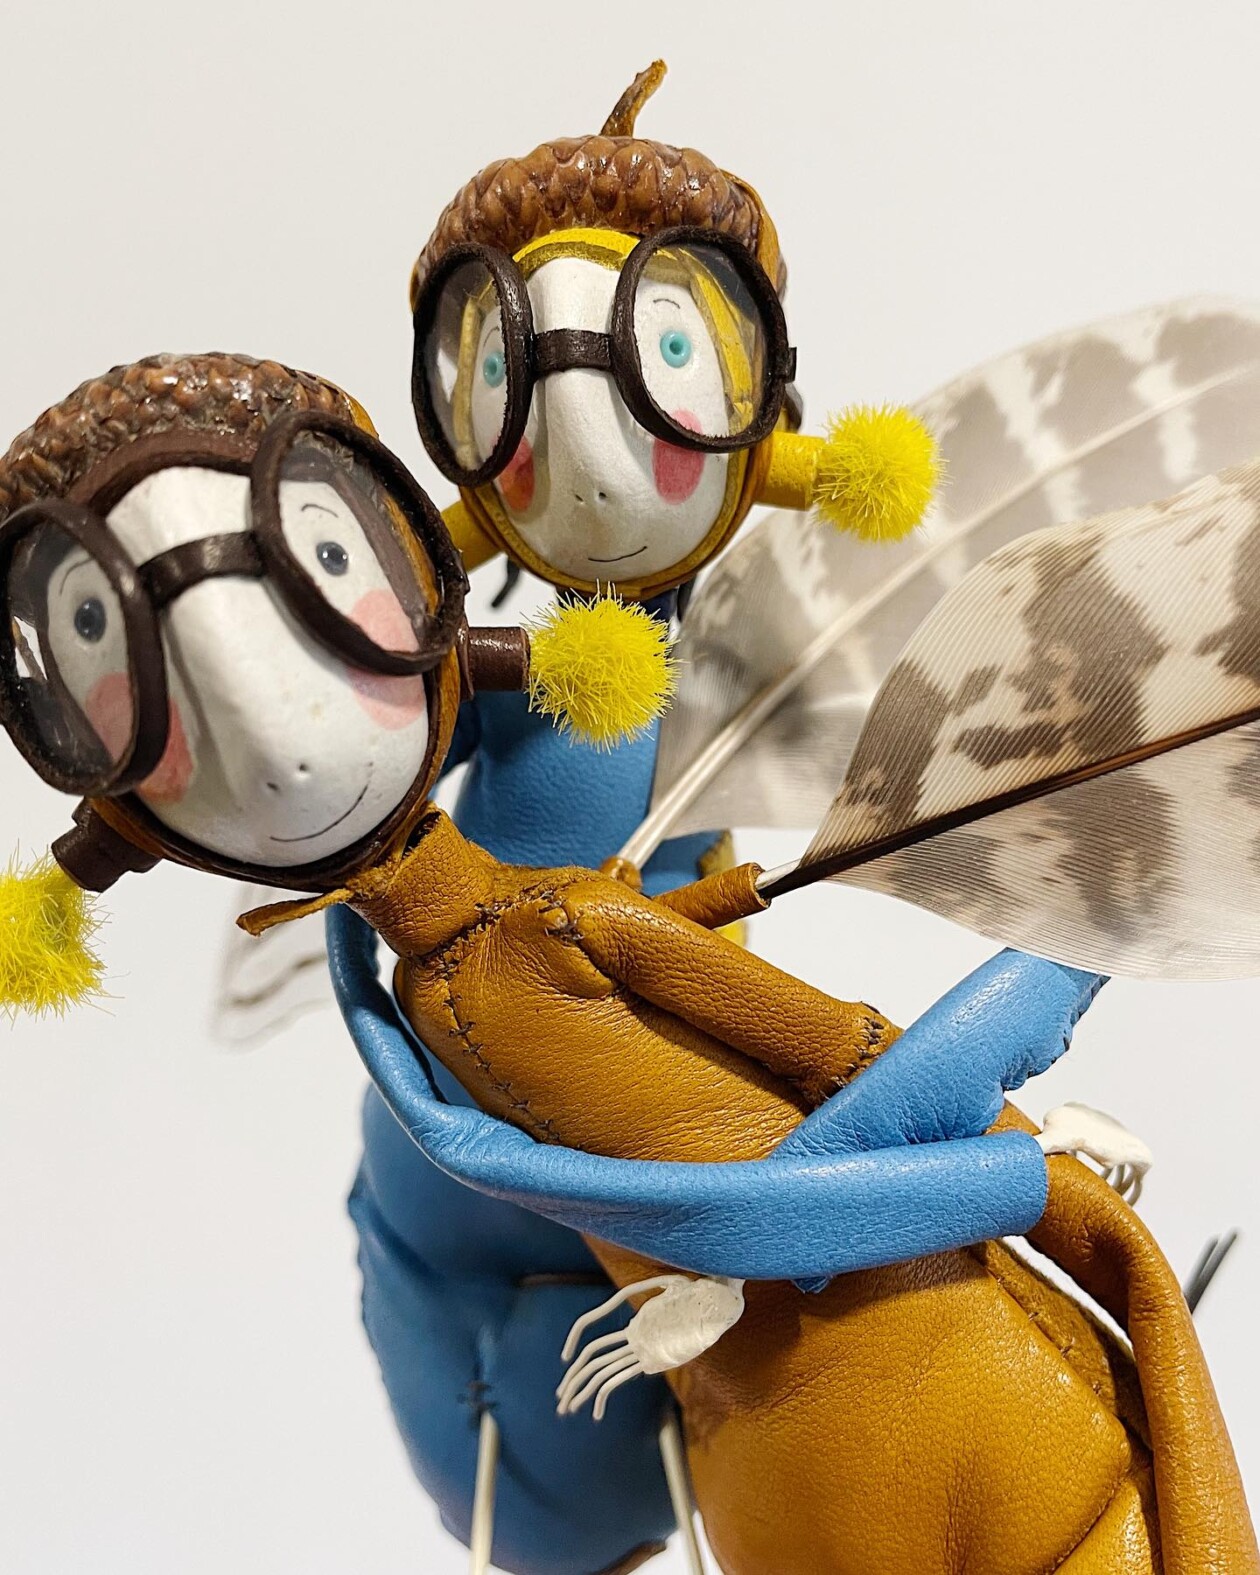 The Quirky And Amusing Fairy Lady Sculptures Of Samantha Bryan (8)